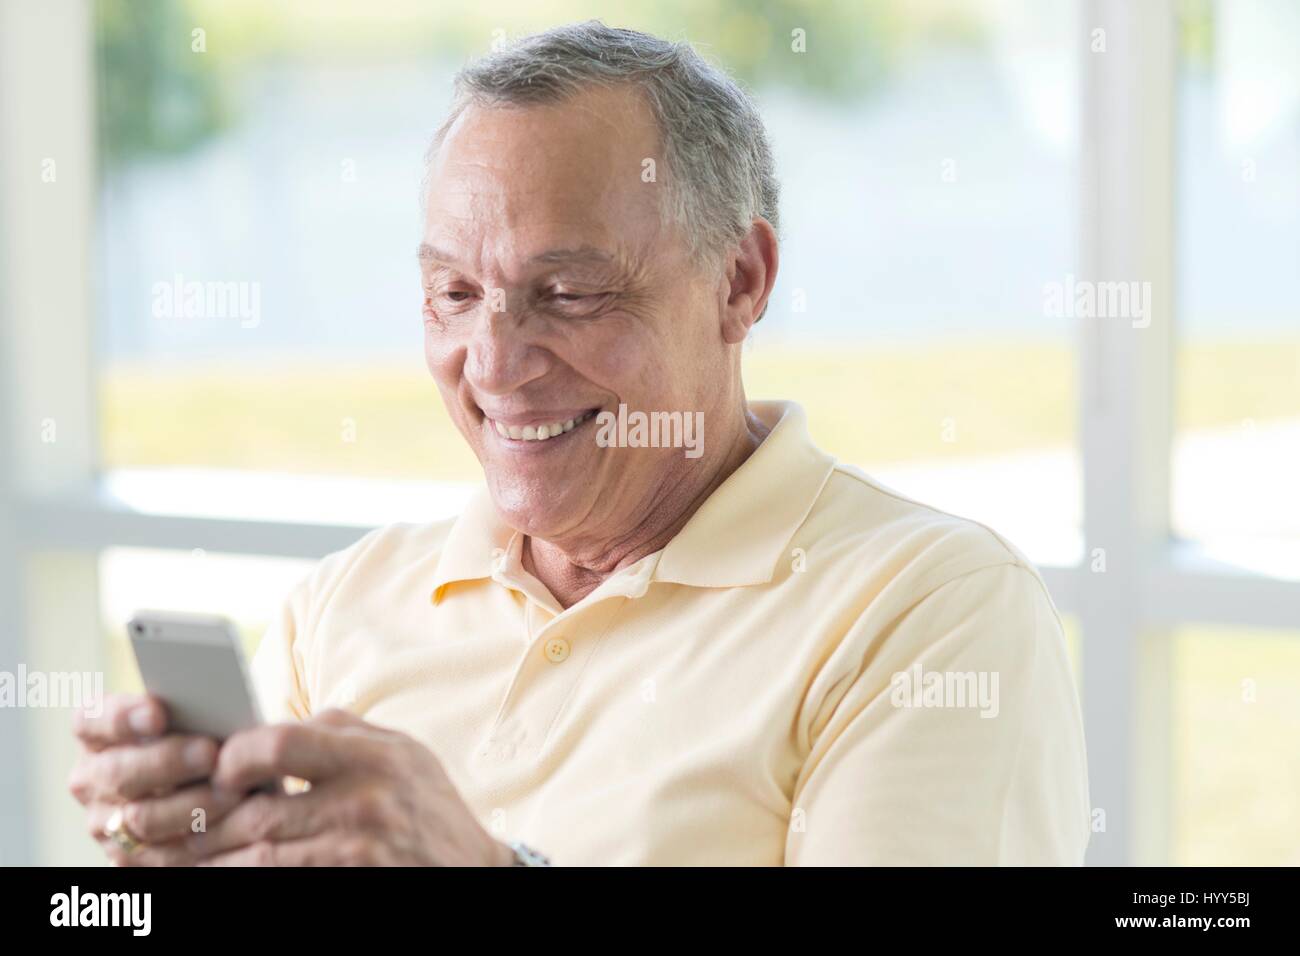 Senior man using cell phone. Banque D'Images